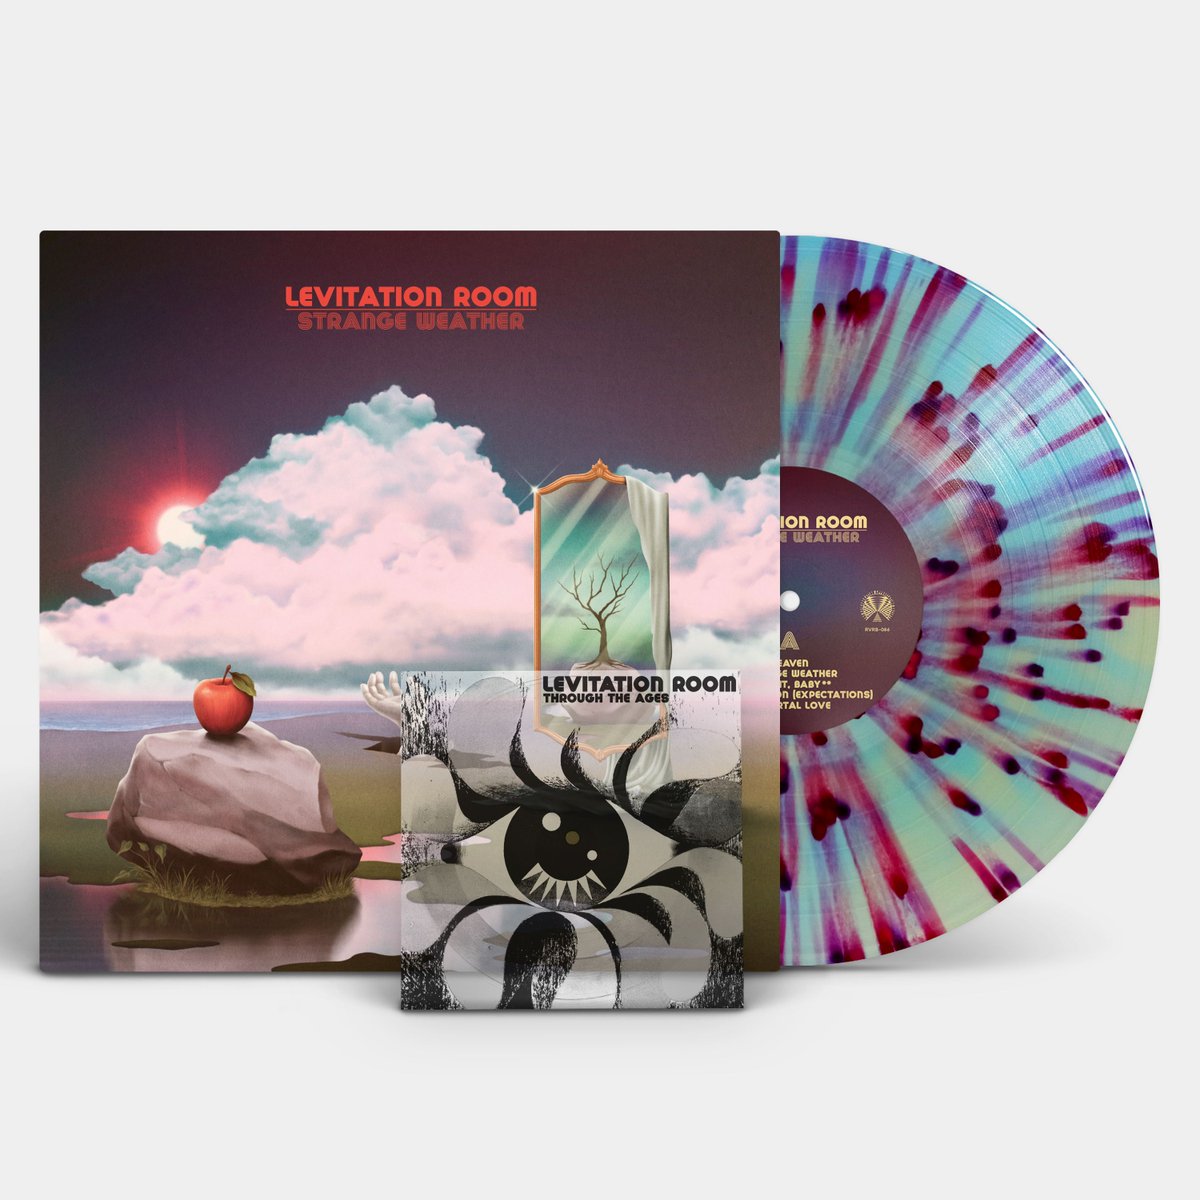 ANNOUNCING #DinkedEdition No 269 Levitation Room - Strange Weather Blue Caelum splatter LP Bonus track 7' flexi 12” 2-sided Insert Hand Numbered /500 Psych-heads assemble! This ones for you... buff.ly/472GBon @levitationroom @greenwayrcrds @LEVITATION @DinkedEdition